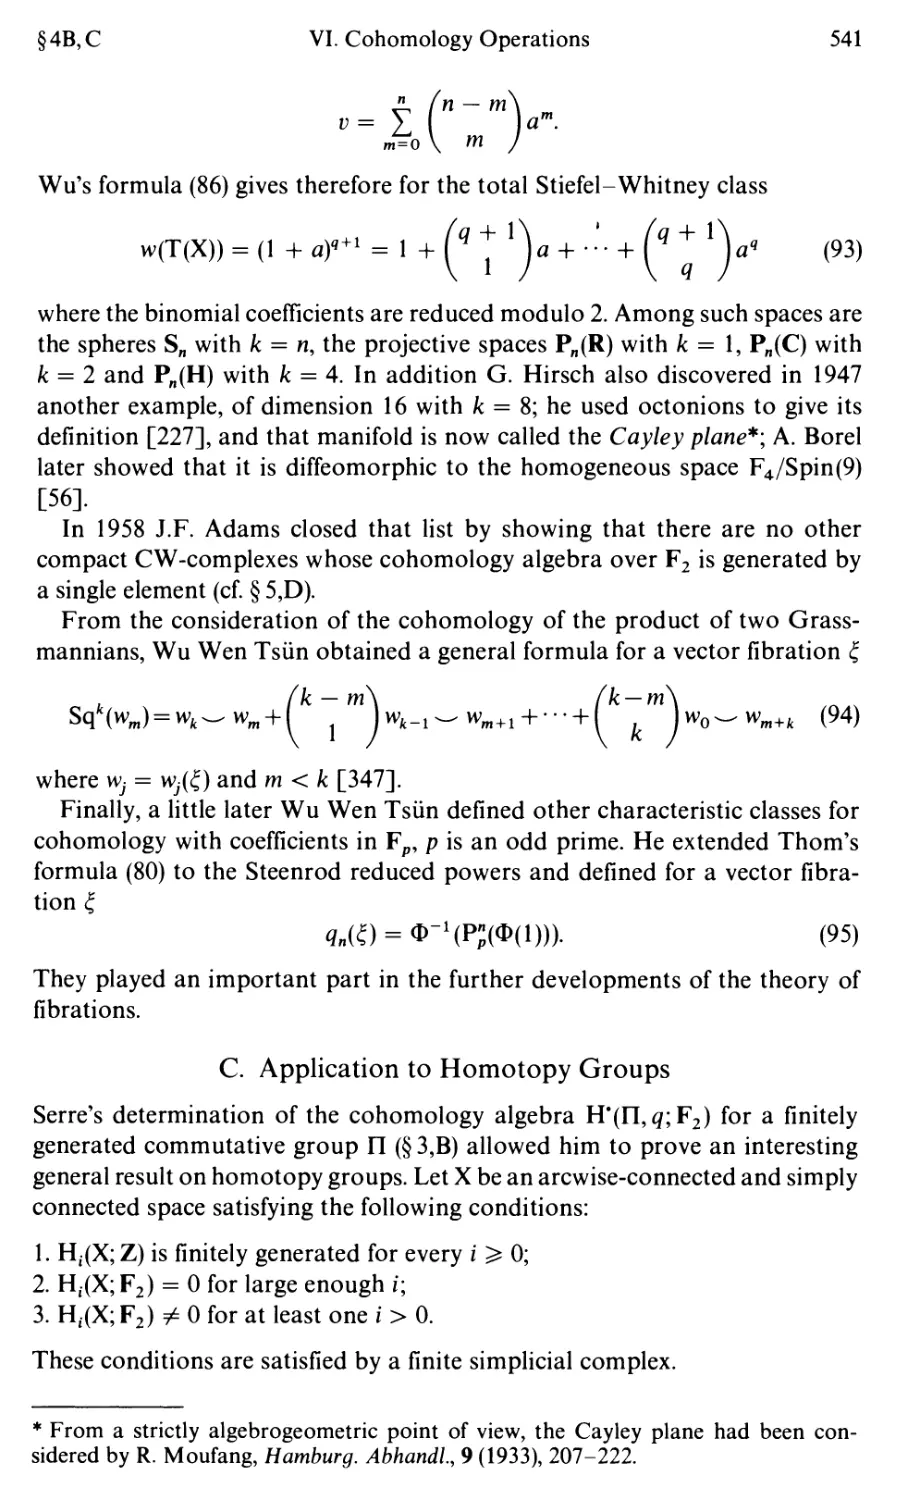 C. Application to Homotopy Groups